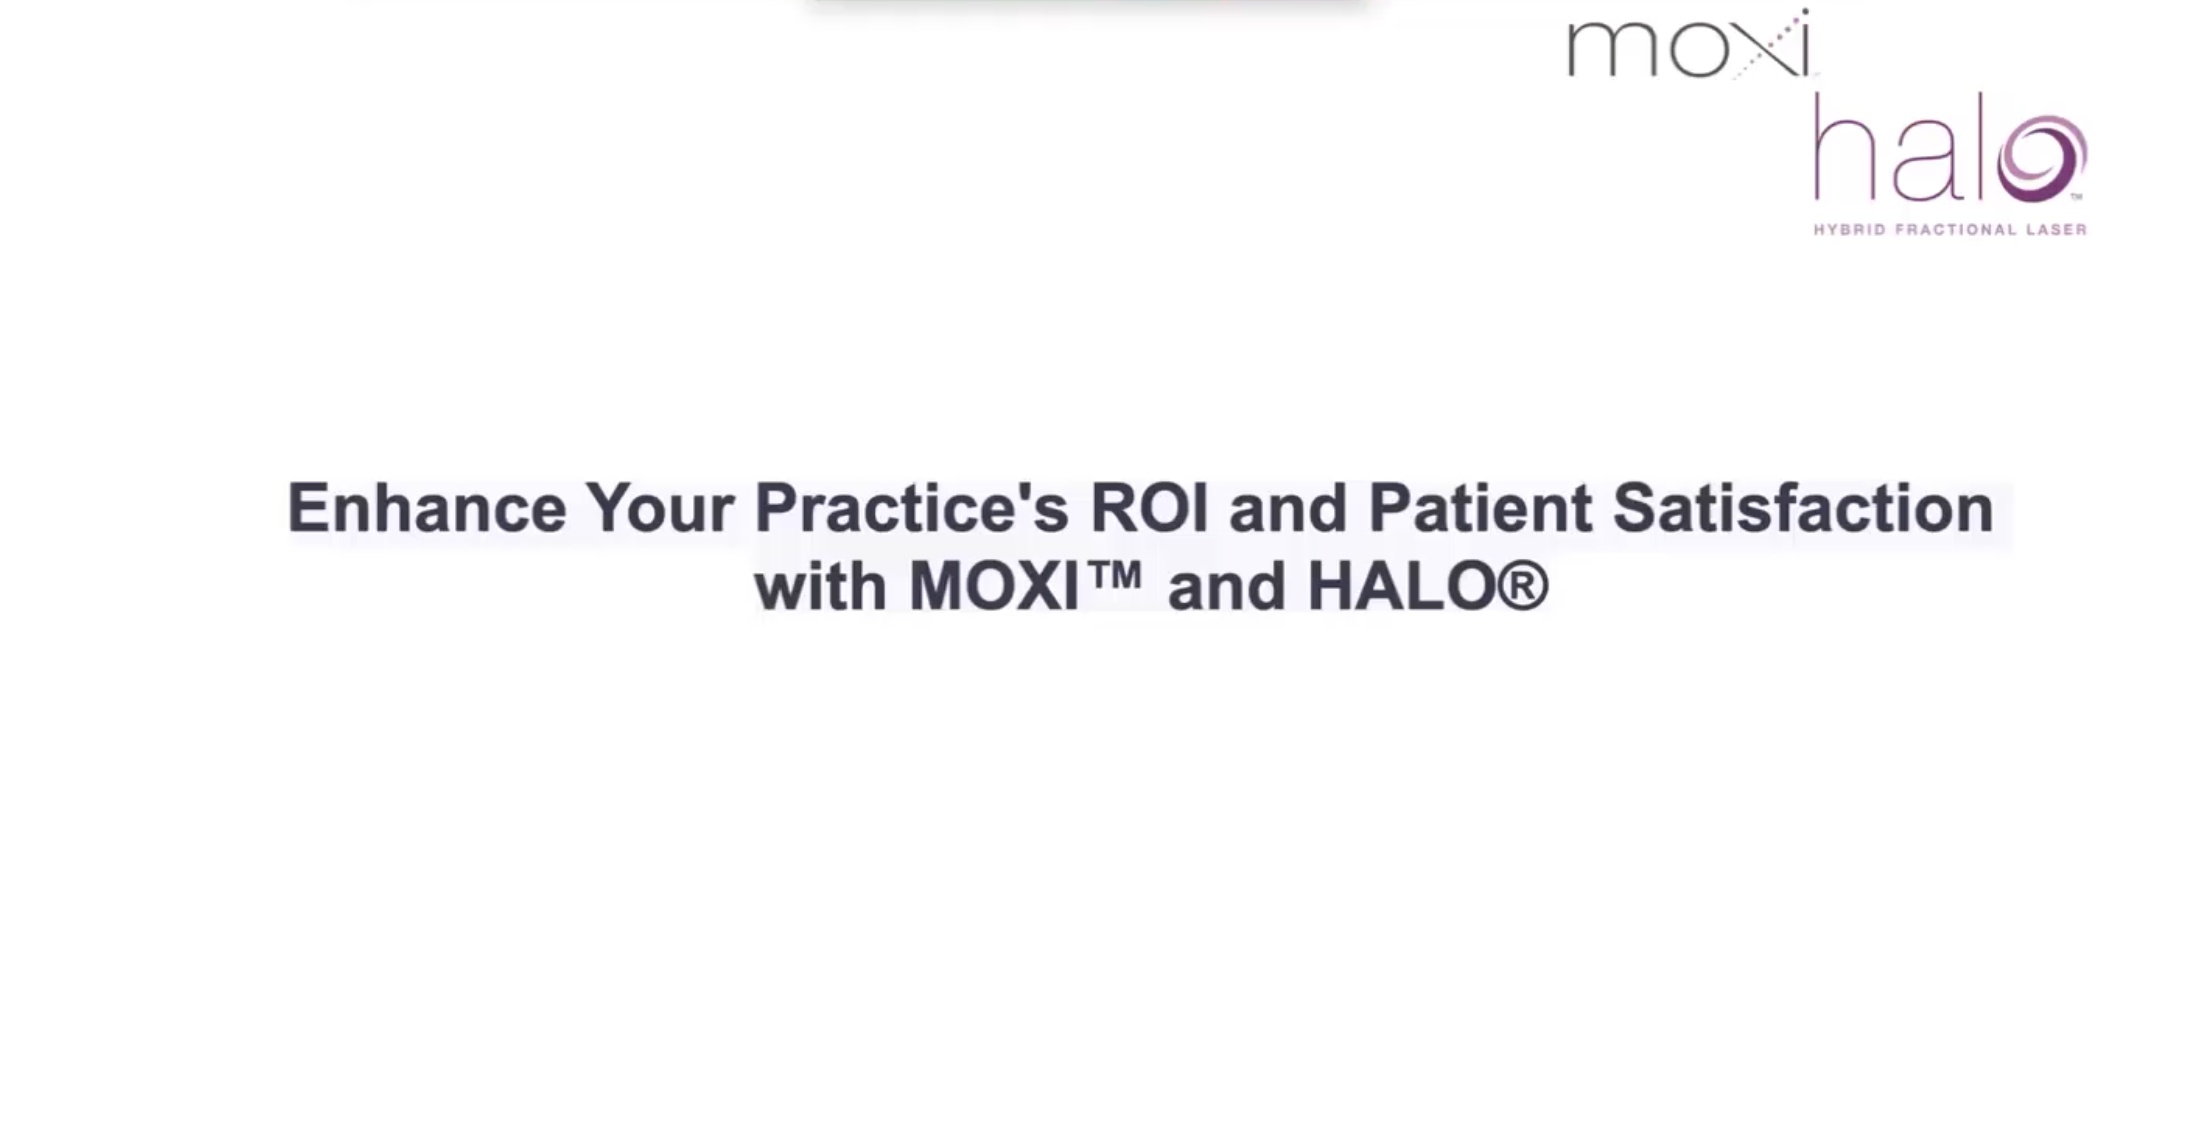 Thumbnail for Enhance Your Practice’s ROI and Patient Satisfaction with MOXI™ and HALO® Skin Resurfacing Treatments